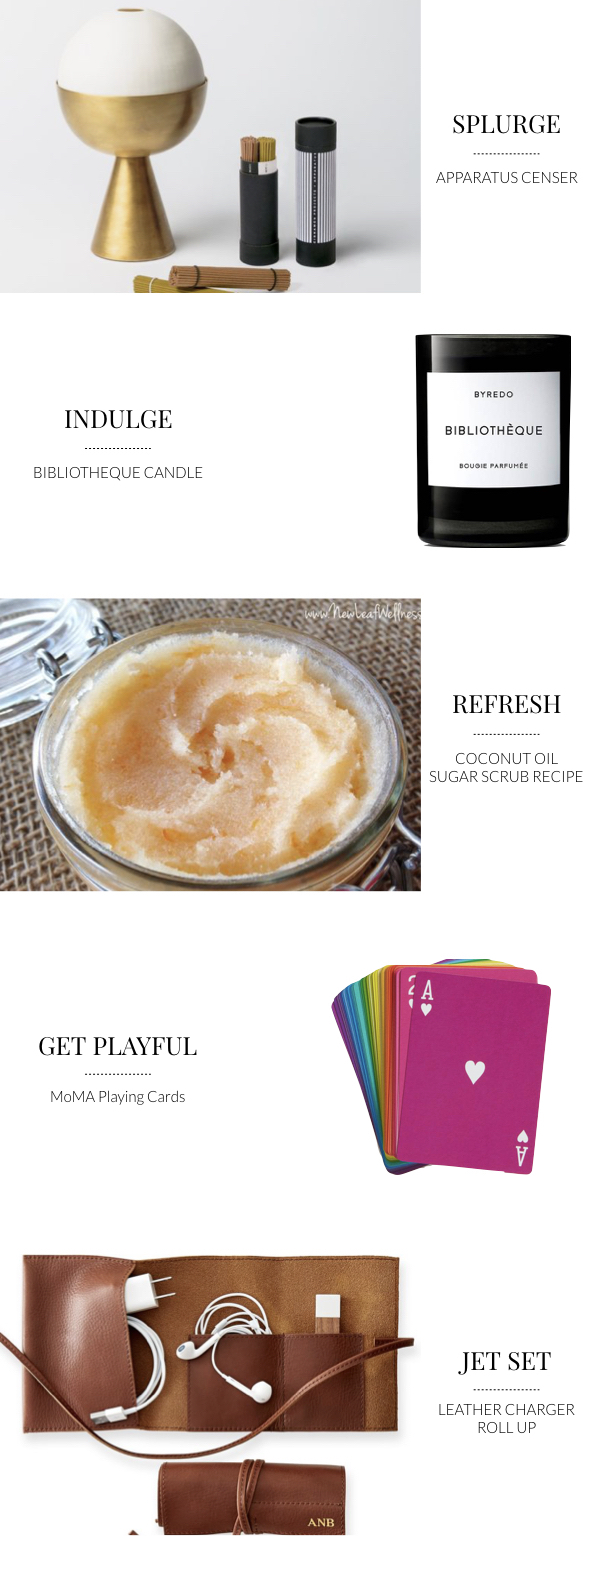 Luxury candle, censer incense burner, coconut oil sugar scrub recipe, mama playing cards, leather charger roll up